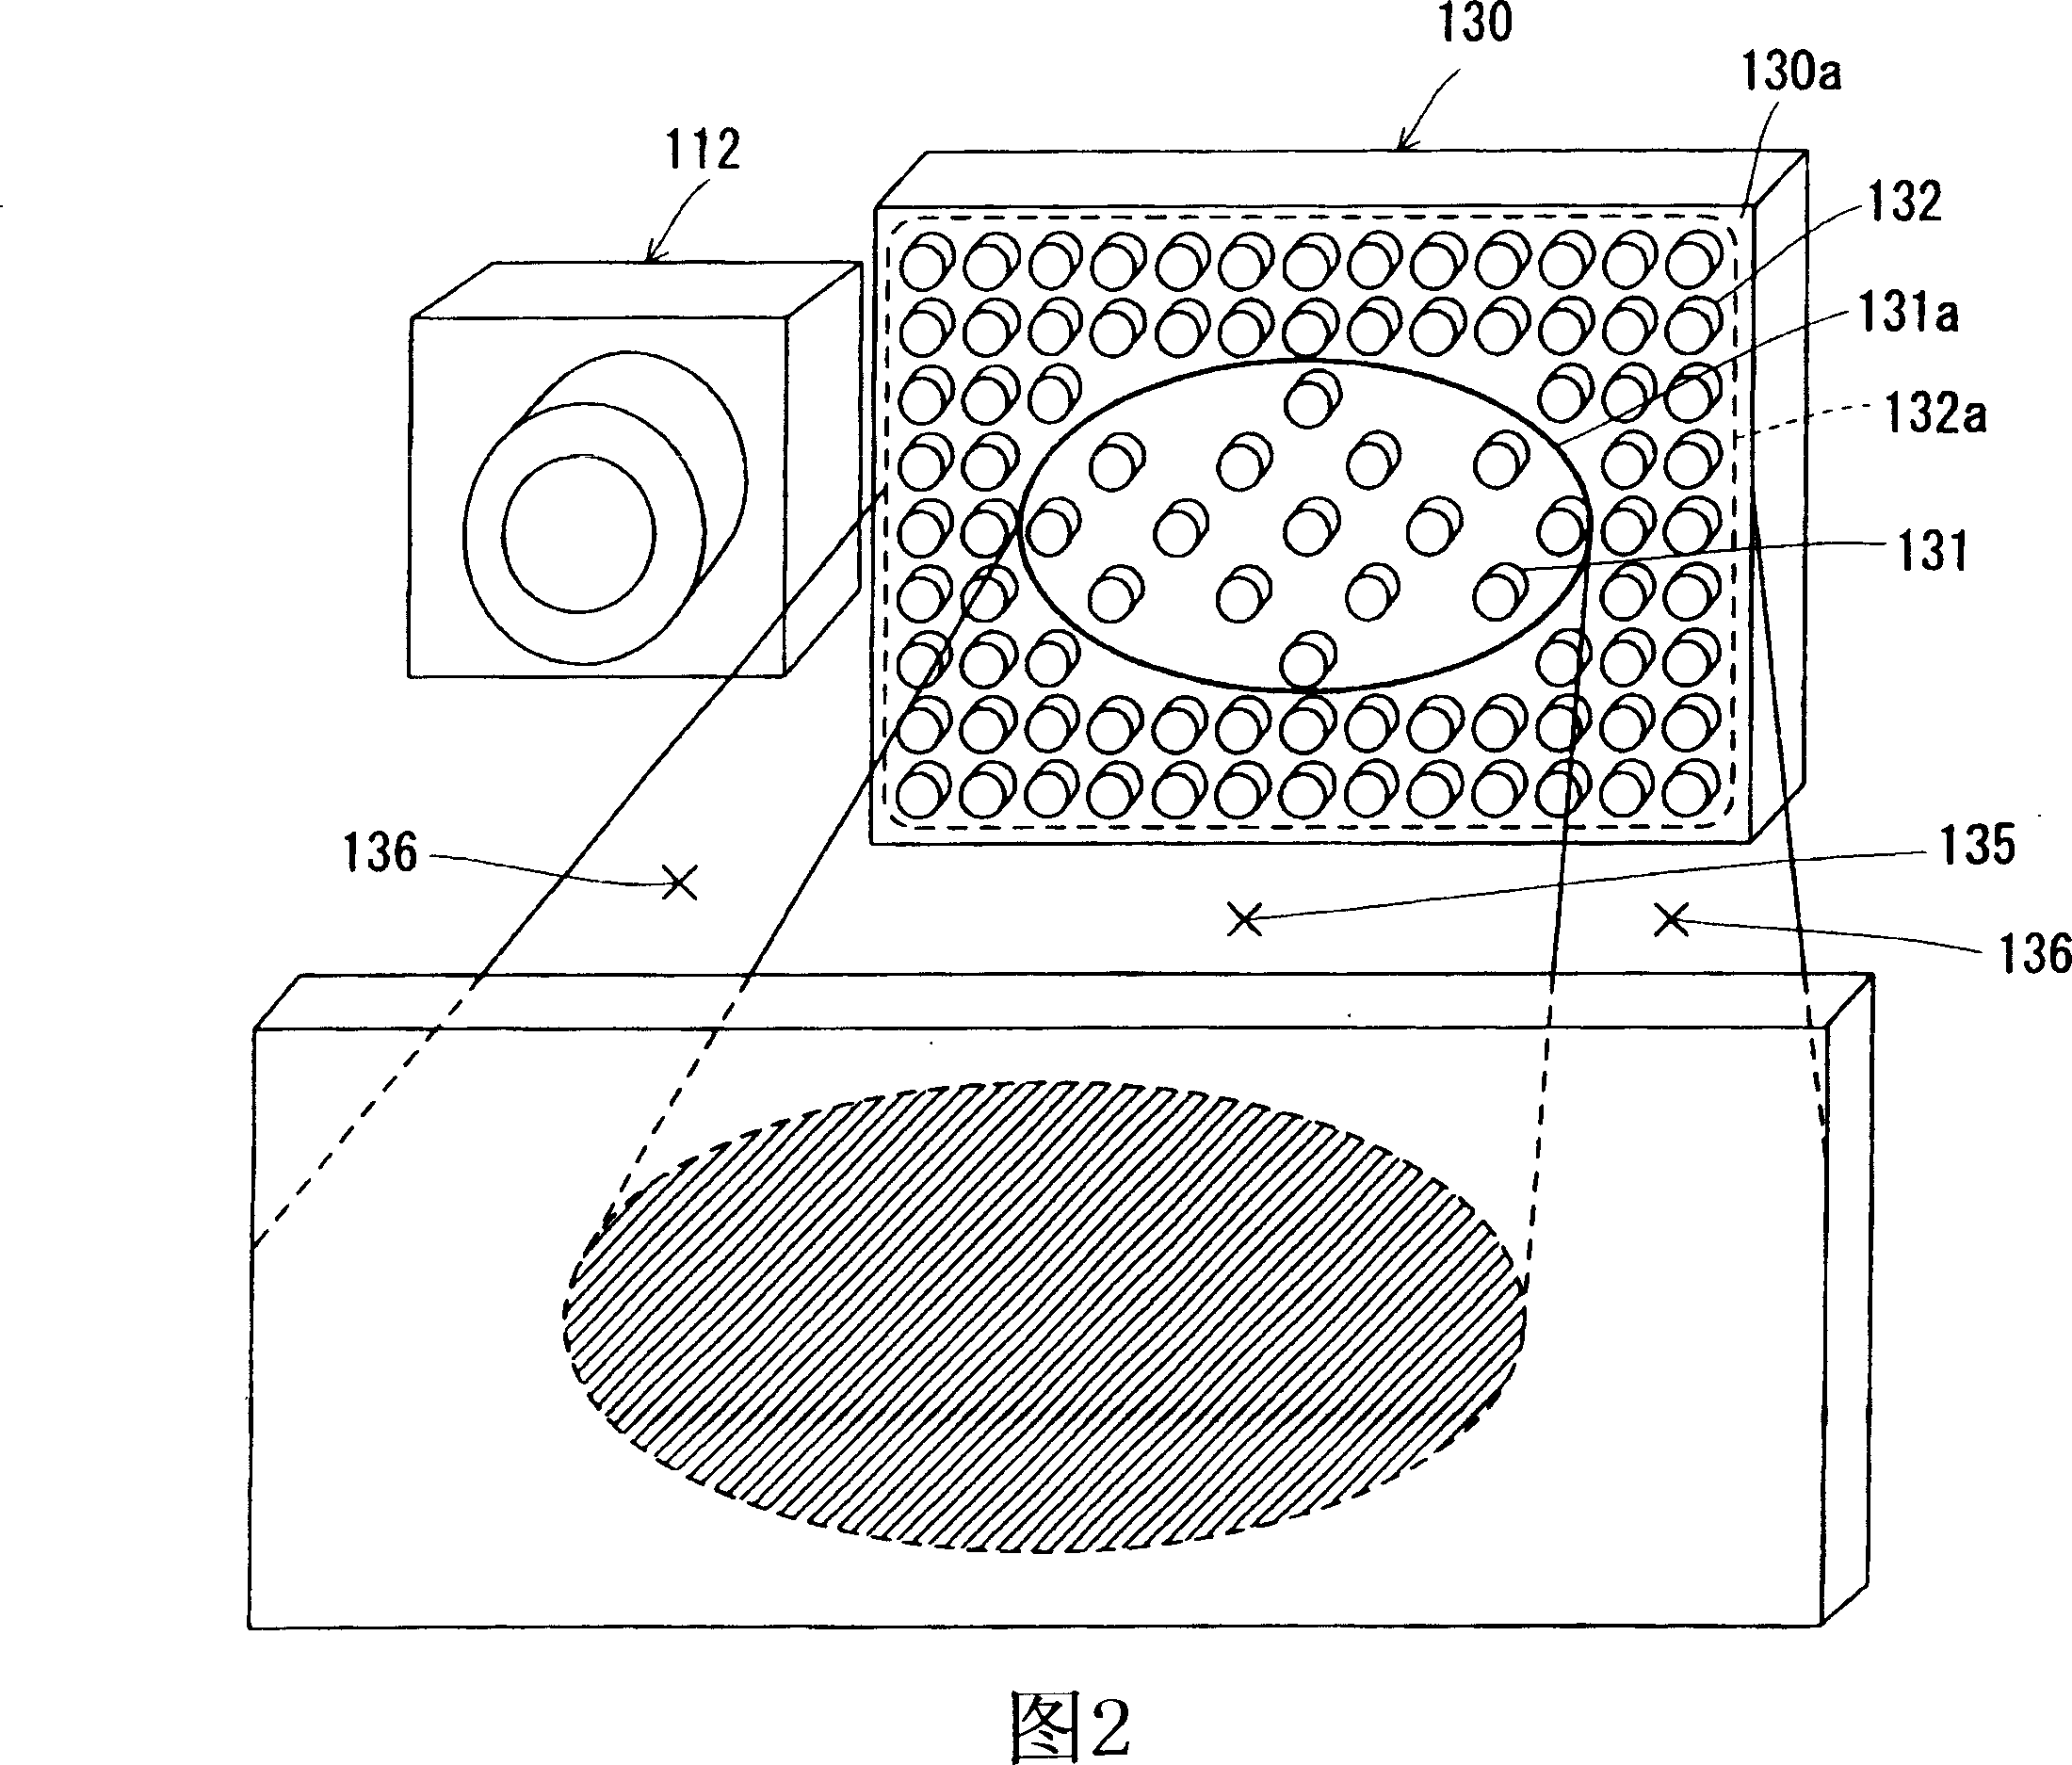 Object detecting system, working device control system and vehicle